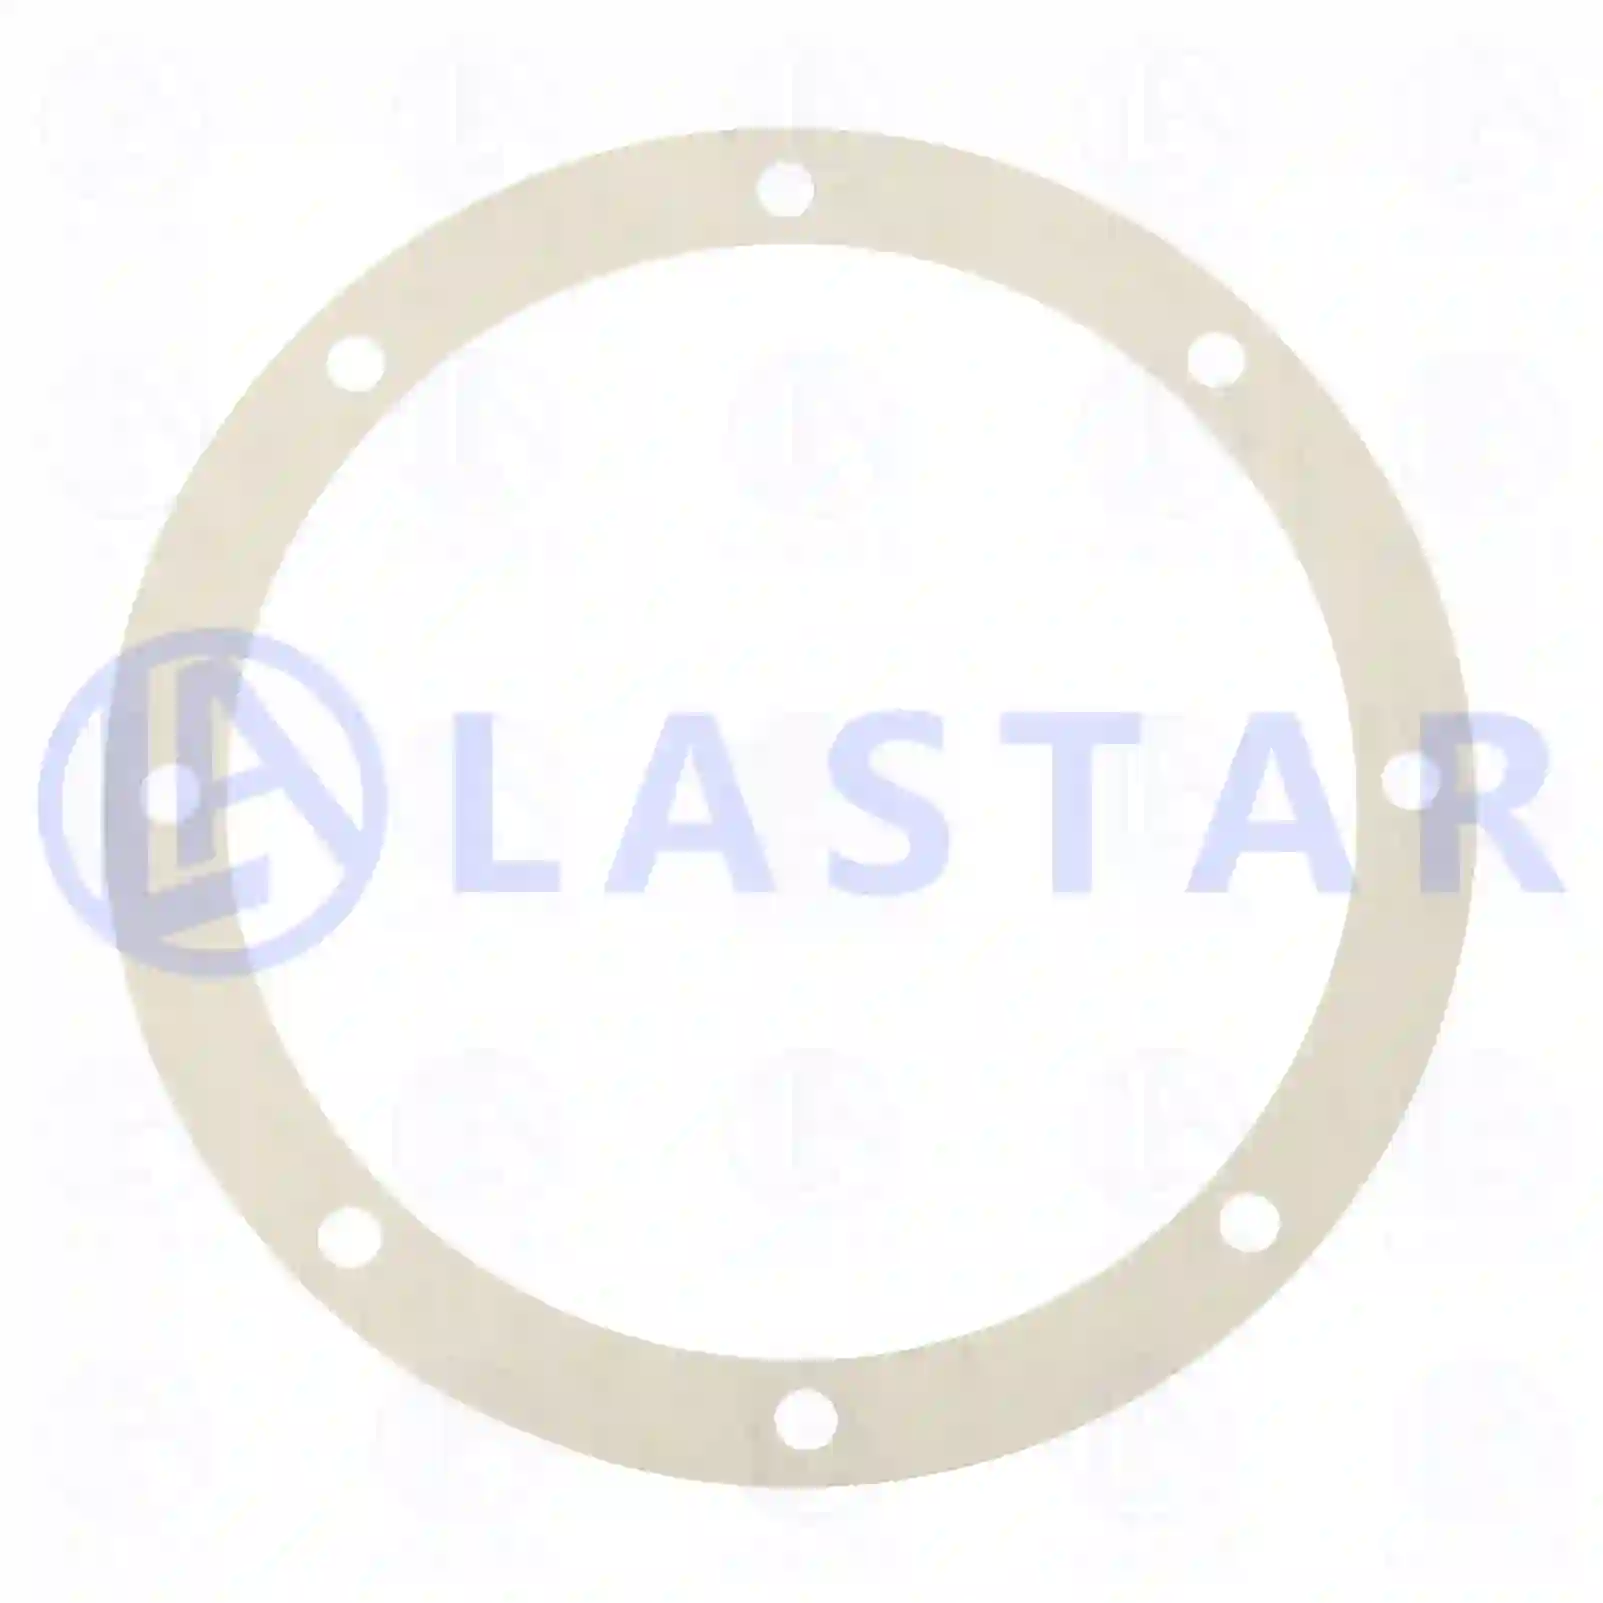 Gasket, hub cover, 77729648, 1585824, 1620742, ZG30033-0008 ||  77729648 Lastar Spare Part | Truck Spare Parts, Auotomotive Spare Parts Gasket, hub cover, 77729648, 1585824, 1620742, ZG30033-0008 ||  77729648 Lastar Spare Part | Truck Spare Parts, Auotomotive Spare Parts